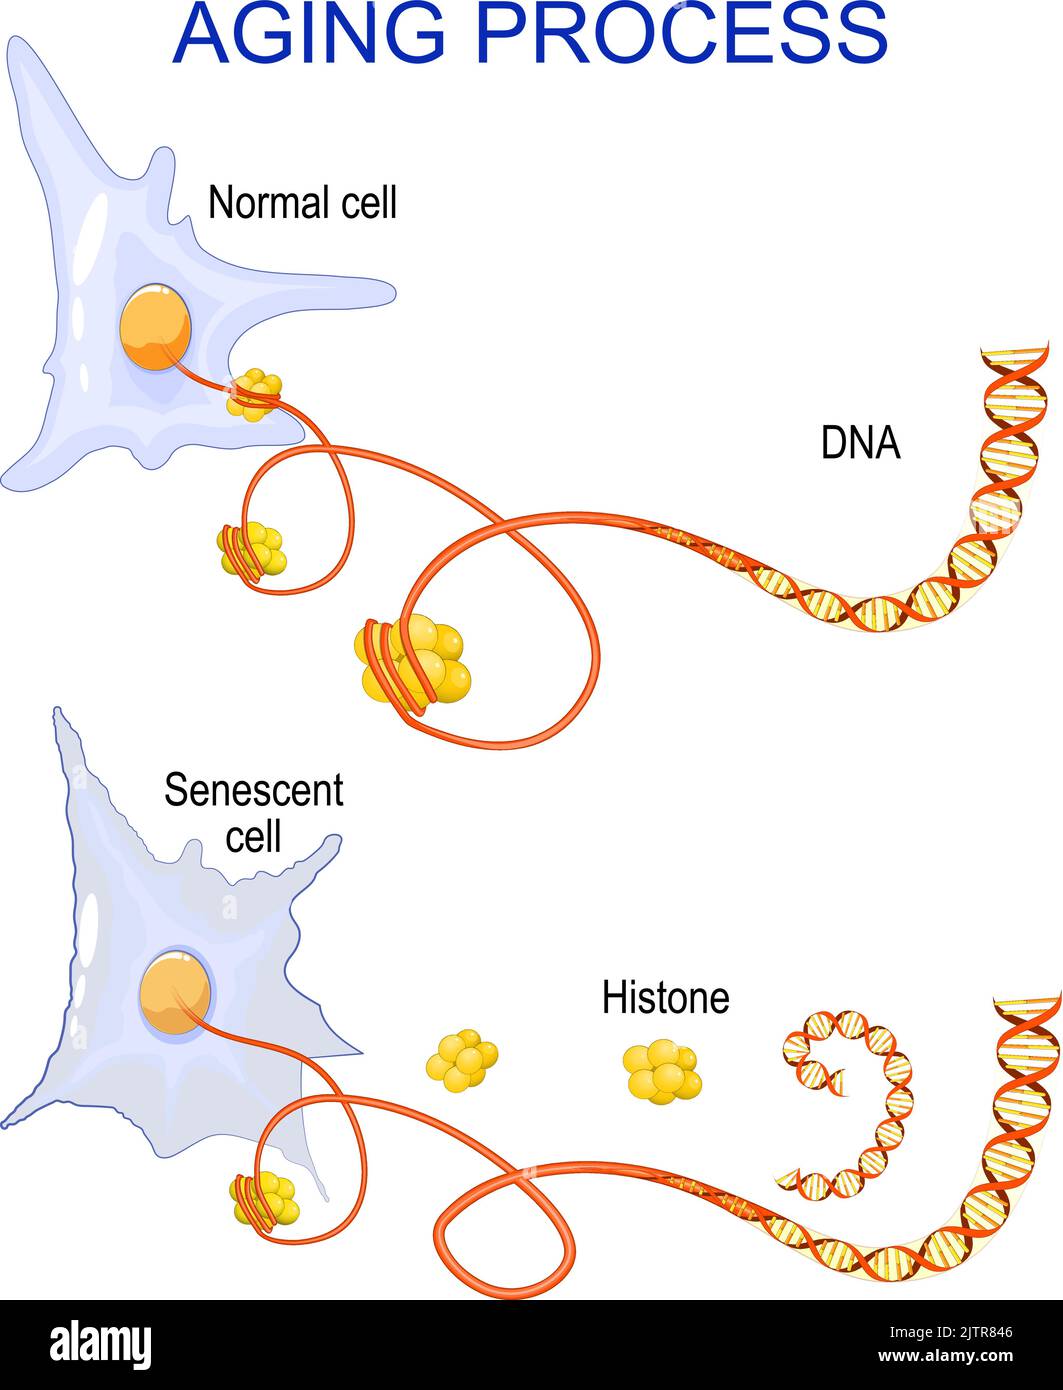 aging process into cells. chromatin, DNA and histones change in ageing and senescent cells. Vector Stock Vector